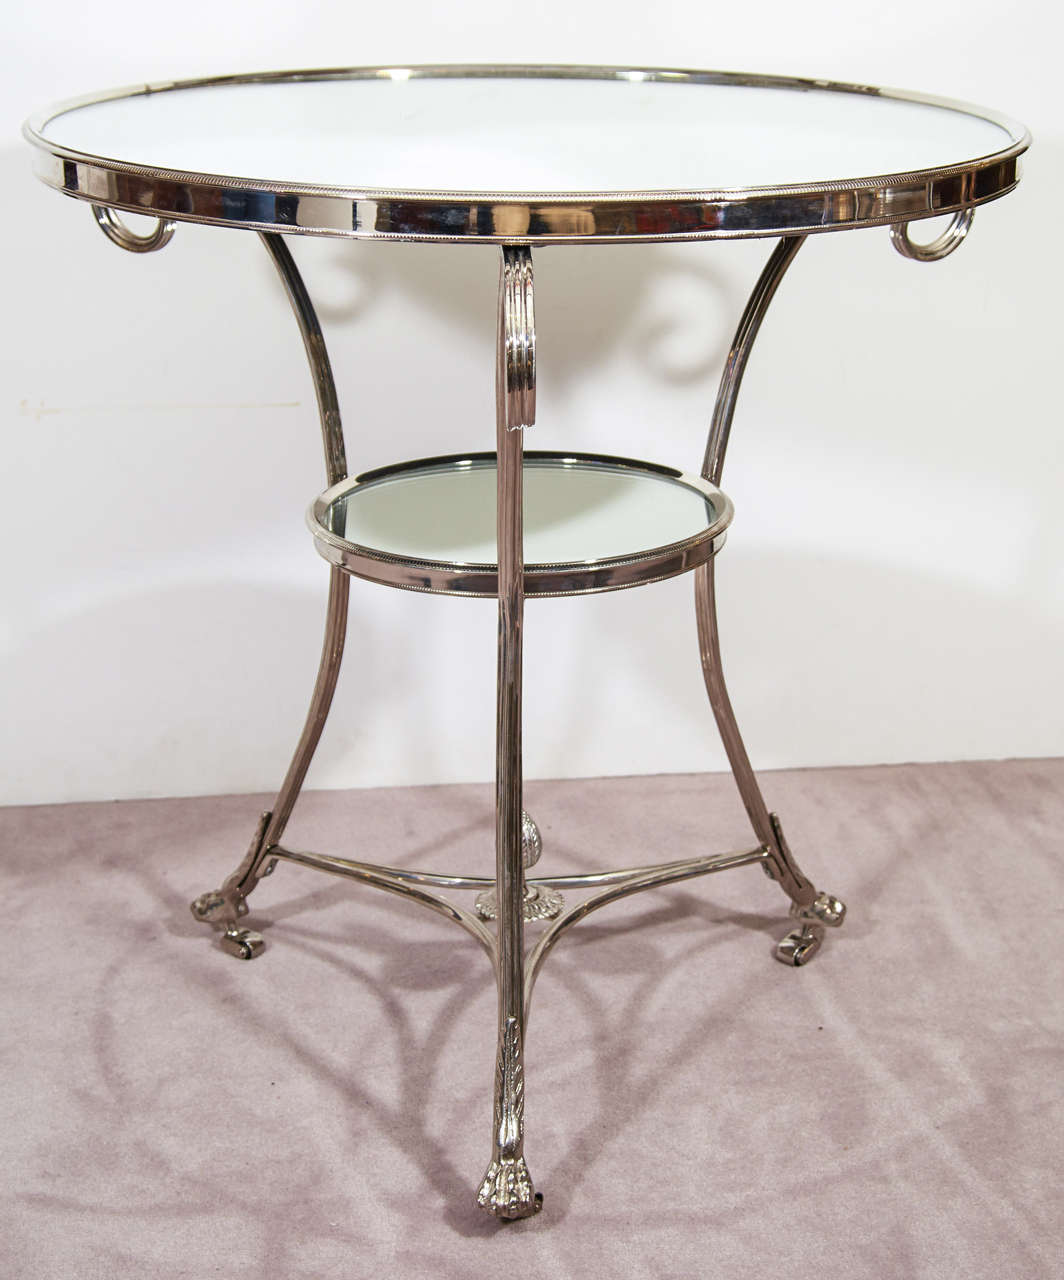 A vintage pair of two-tier glass and chrome side tables with curved legs and paw feet in the style of Maison Jansen. Each has a lower circular glass shelf.